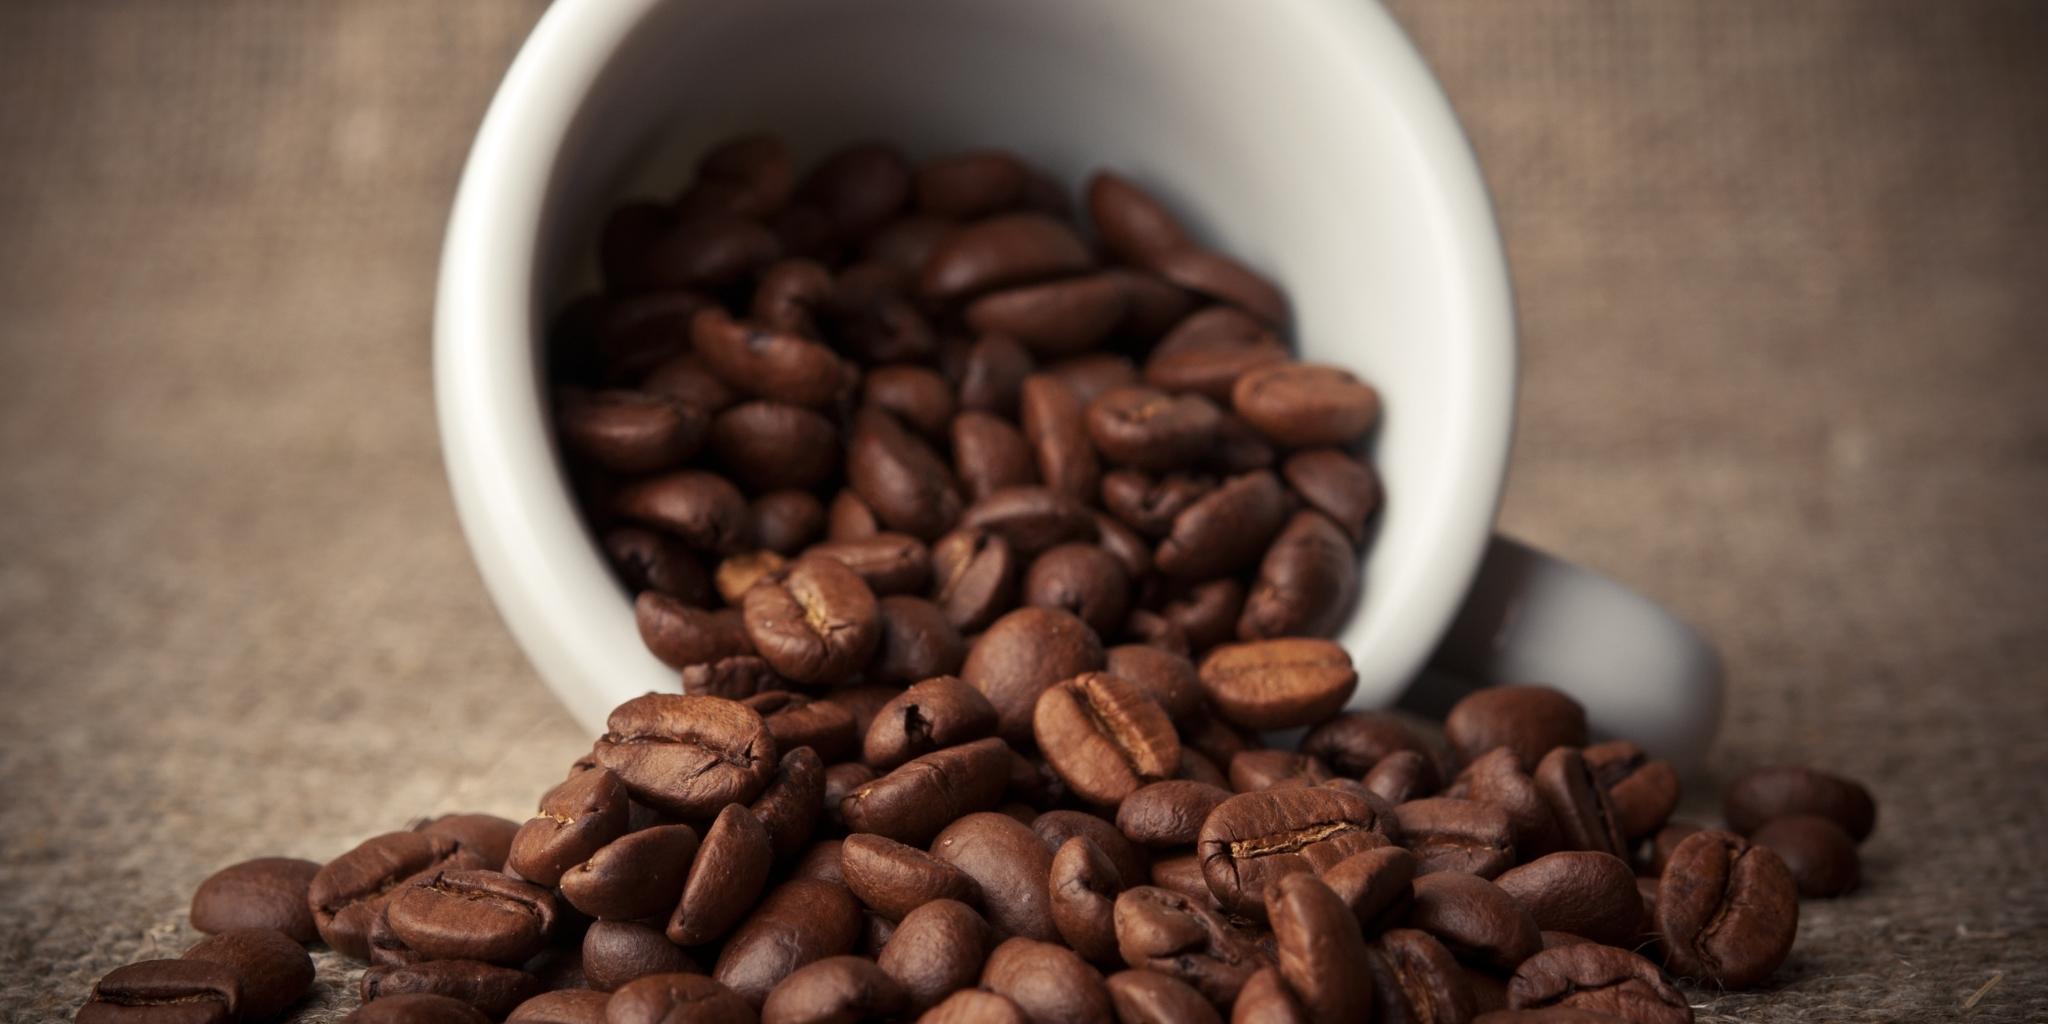 Carlini Coffee offers premium quality fresh roasted coffees shipped directly to your door